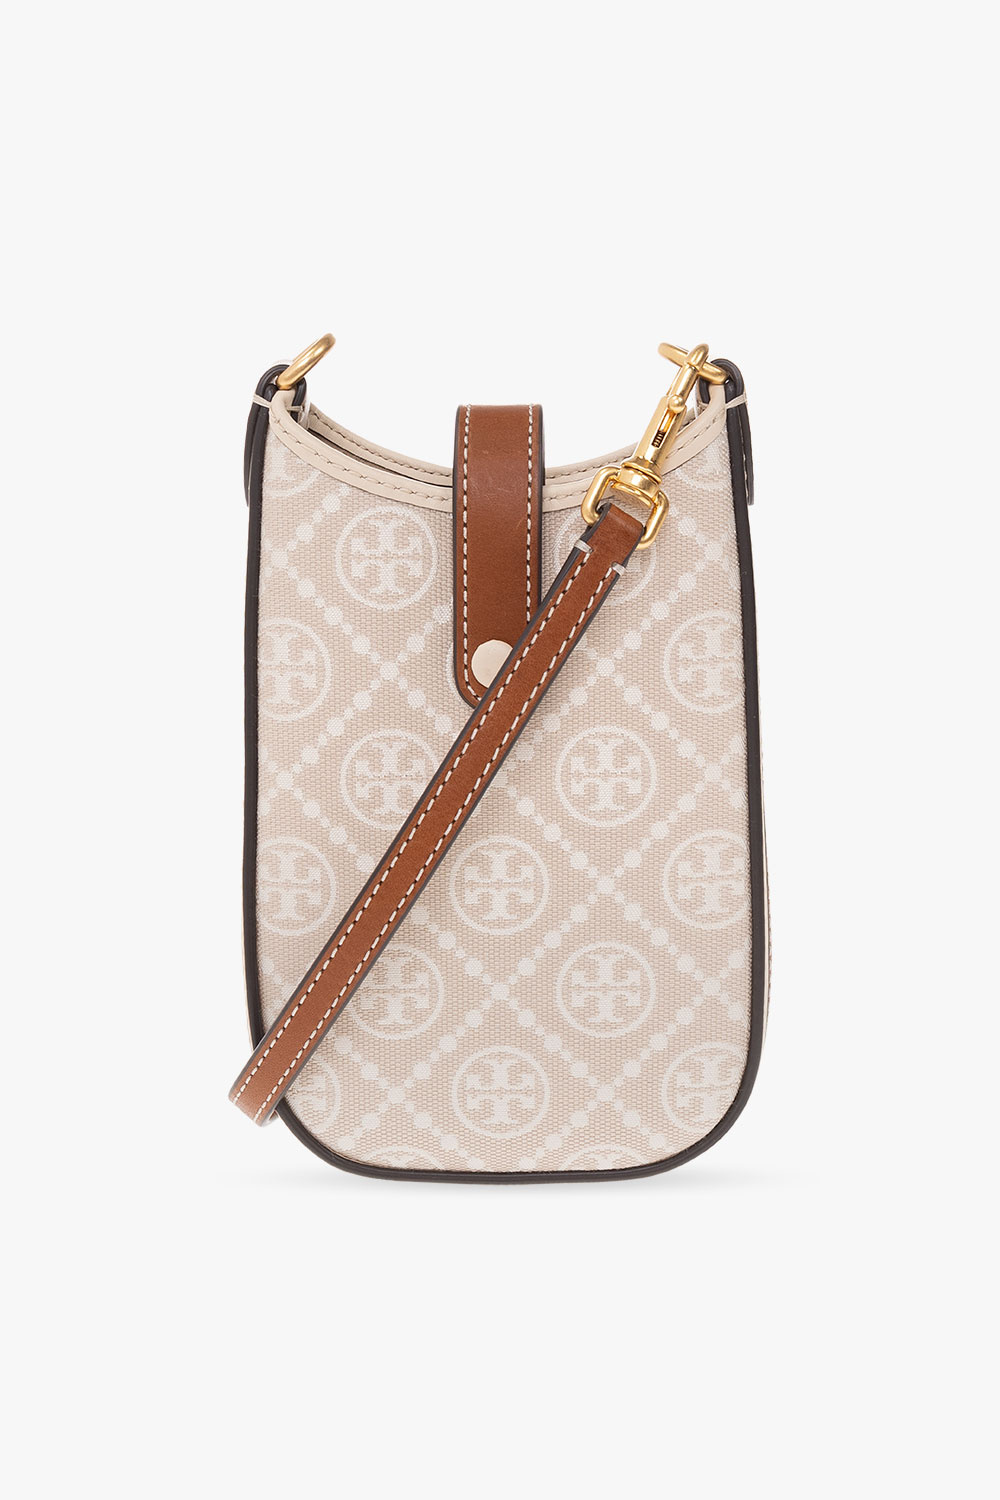 Tory Burch Strapped phone holder, Women's Accessories